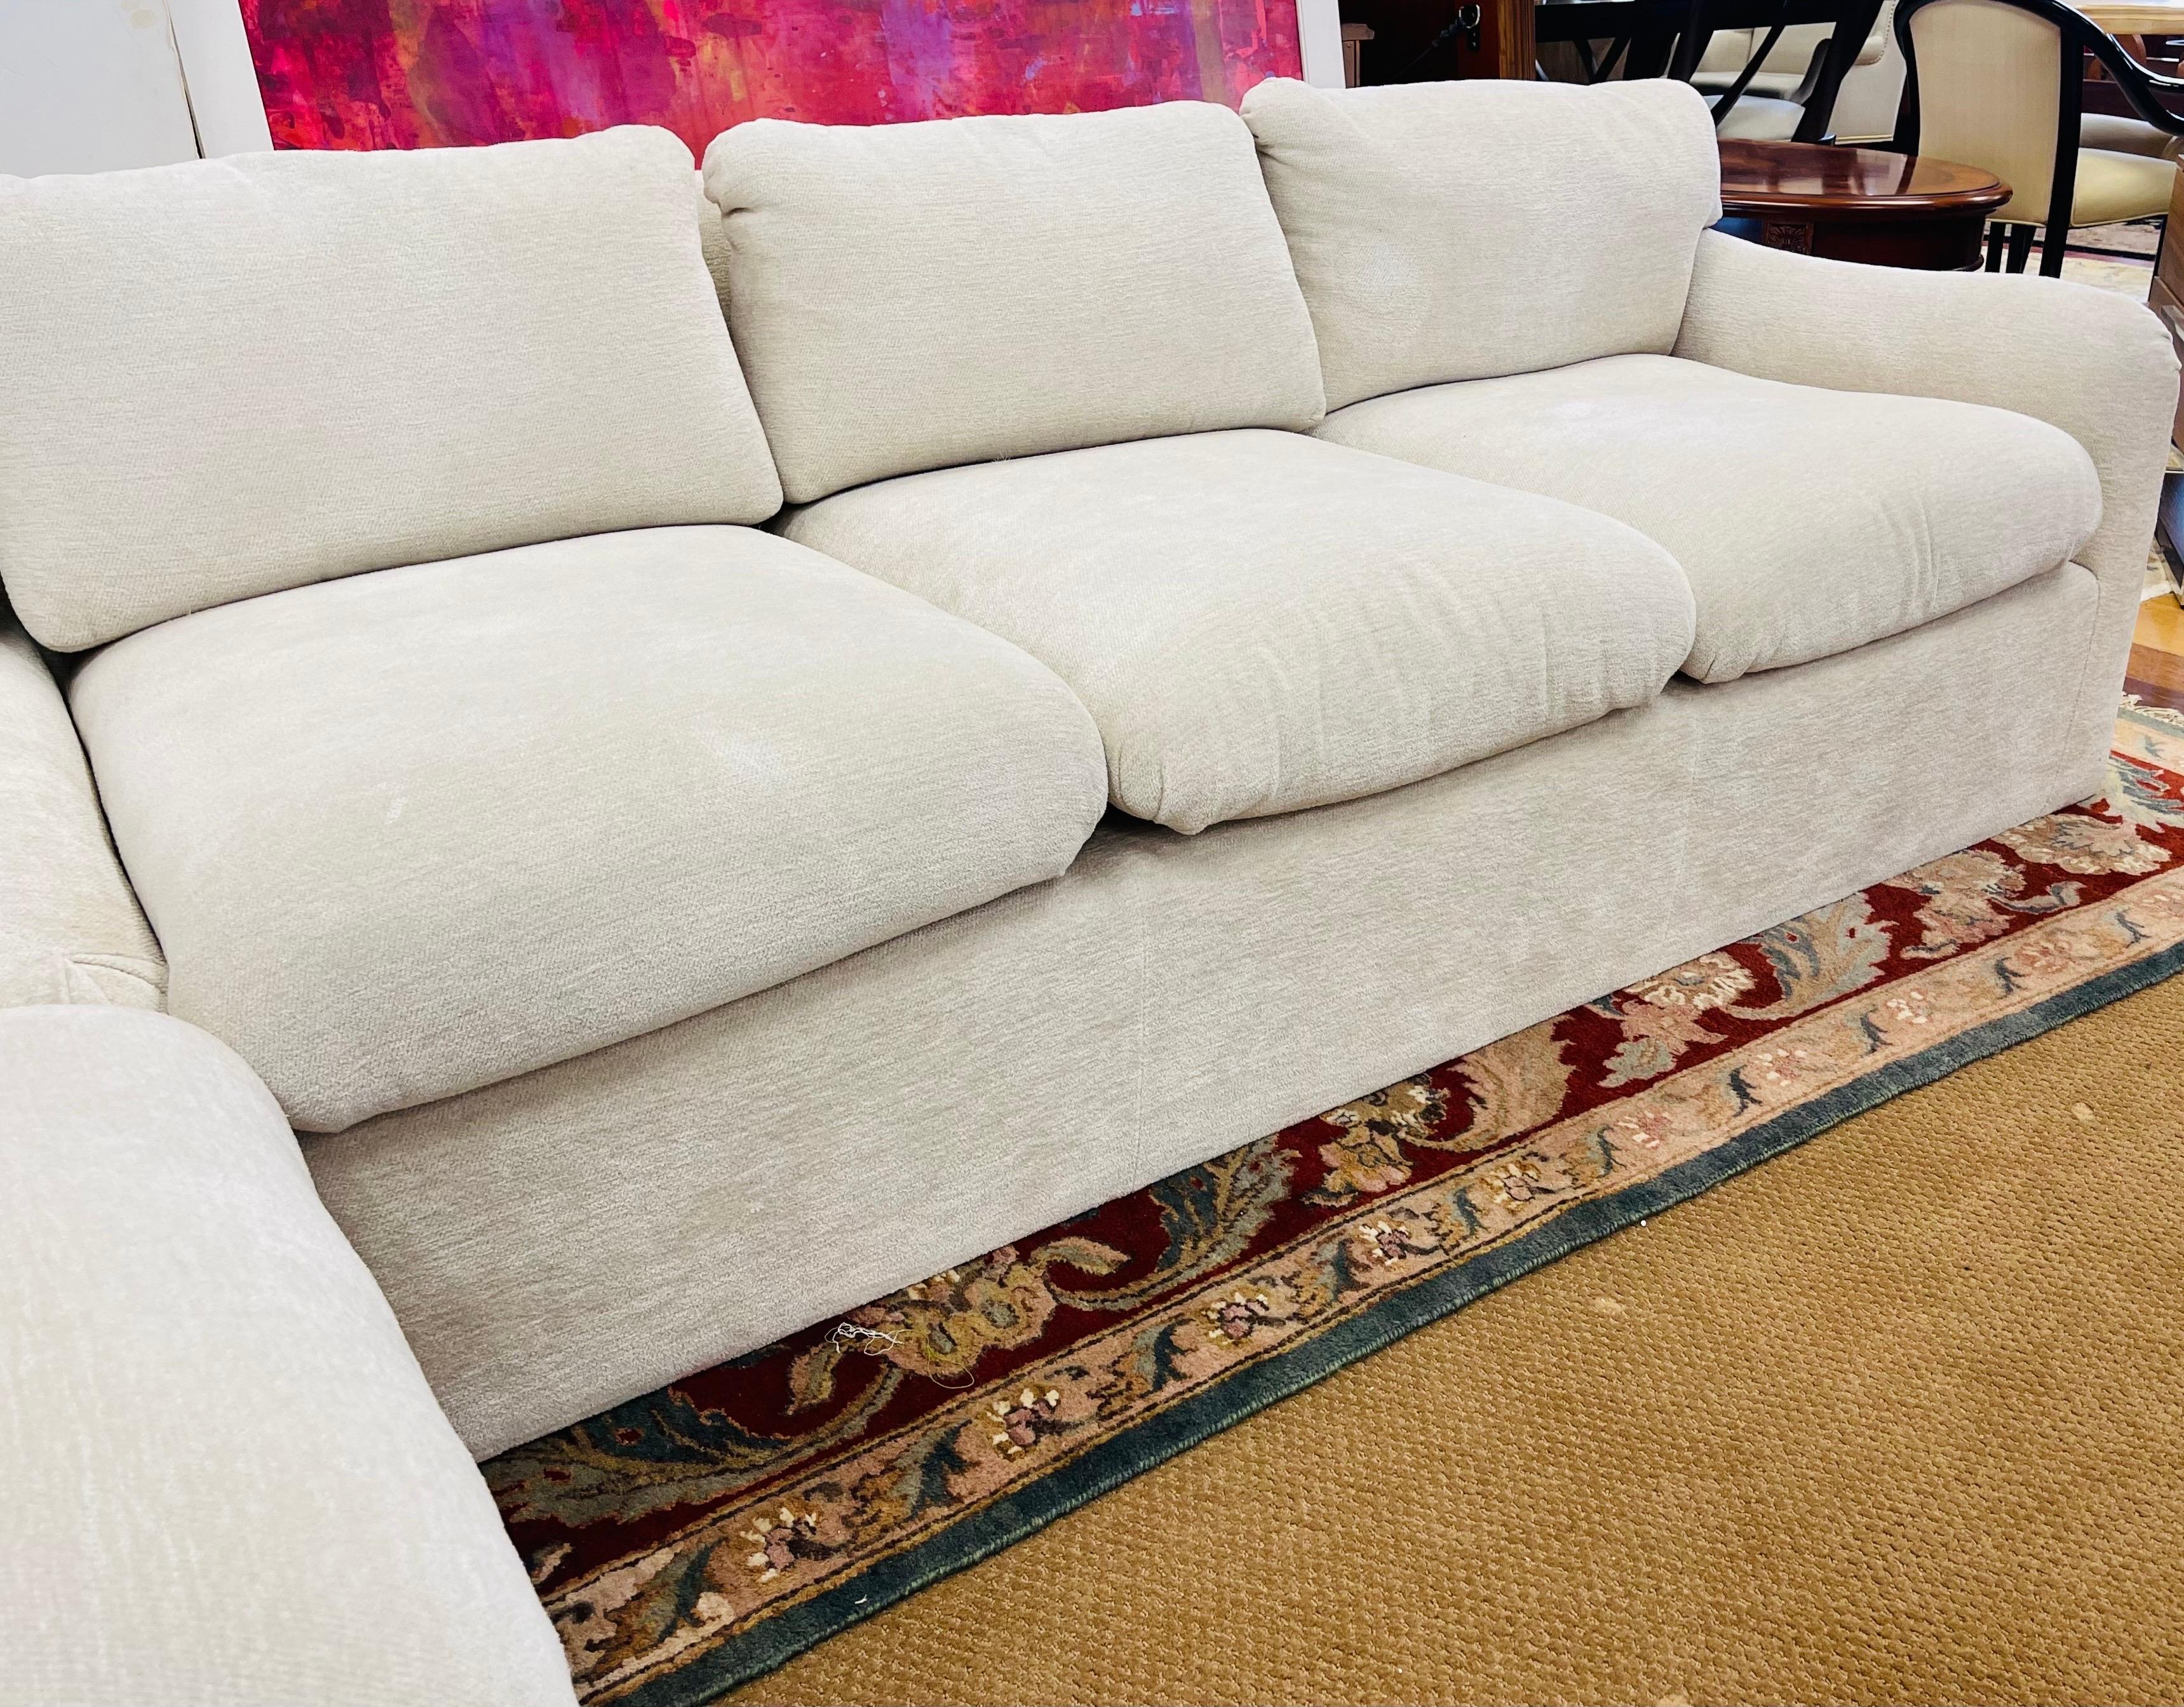 J. Robert Scott Designer Sectional Sofa 3-Piece in L-Shape with Chenille Fabric 3